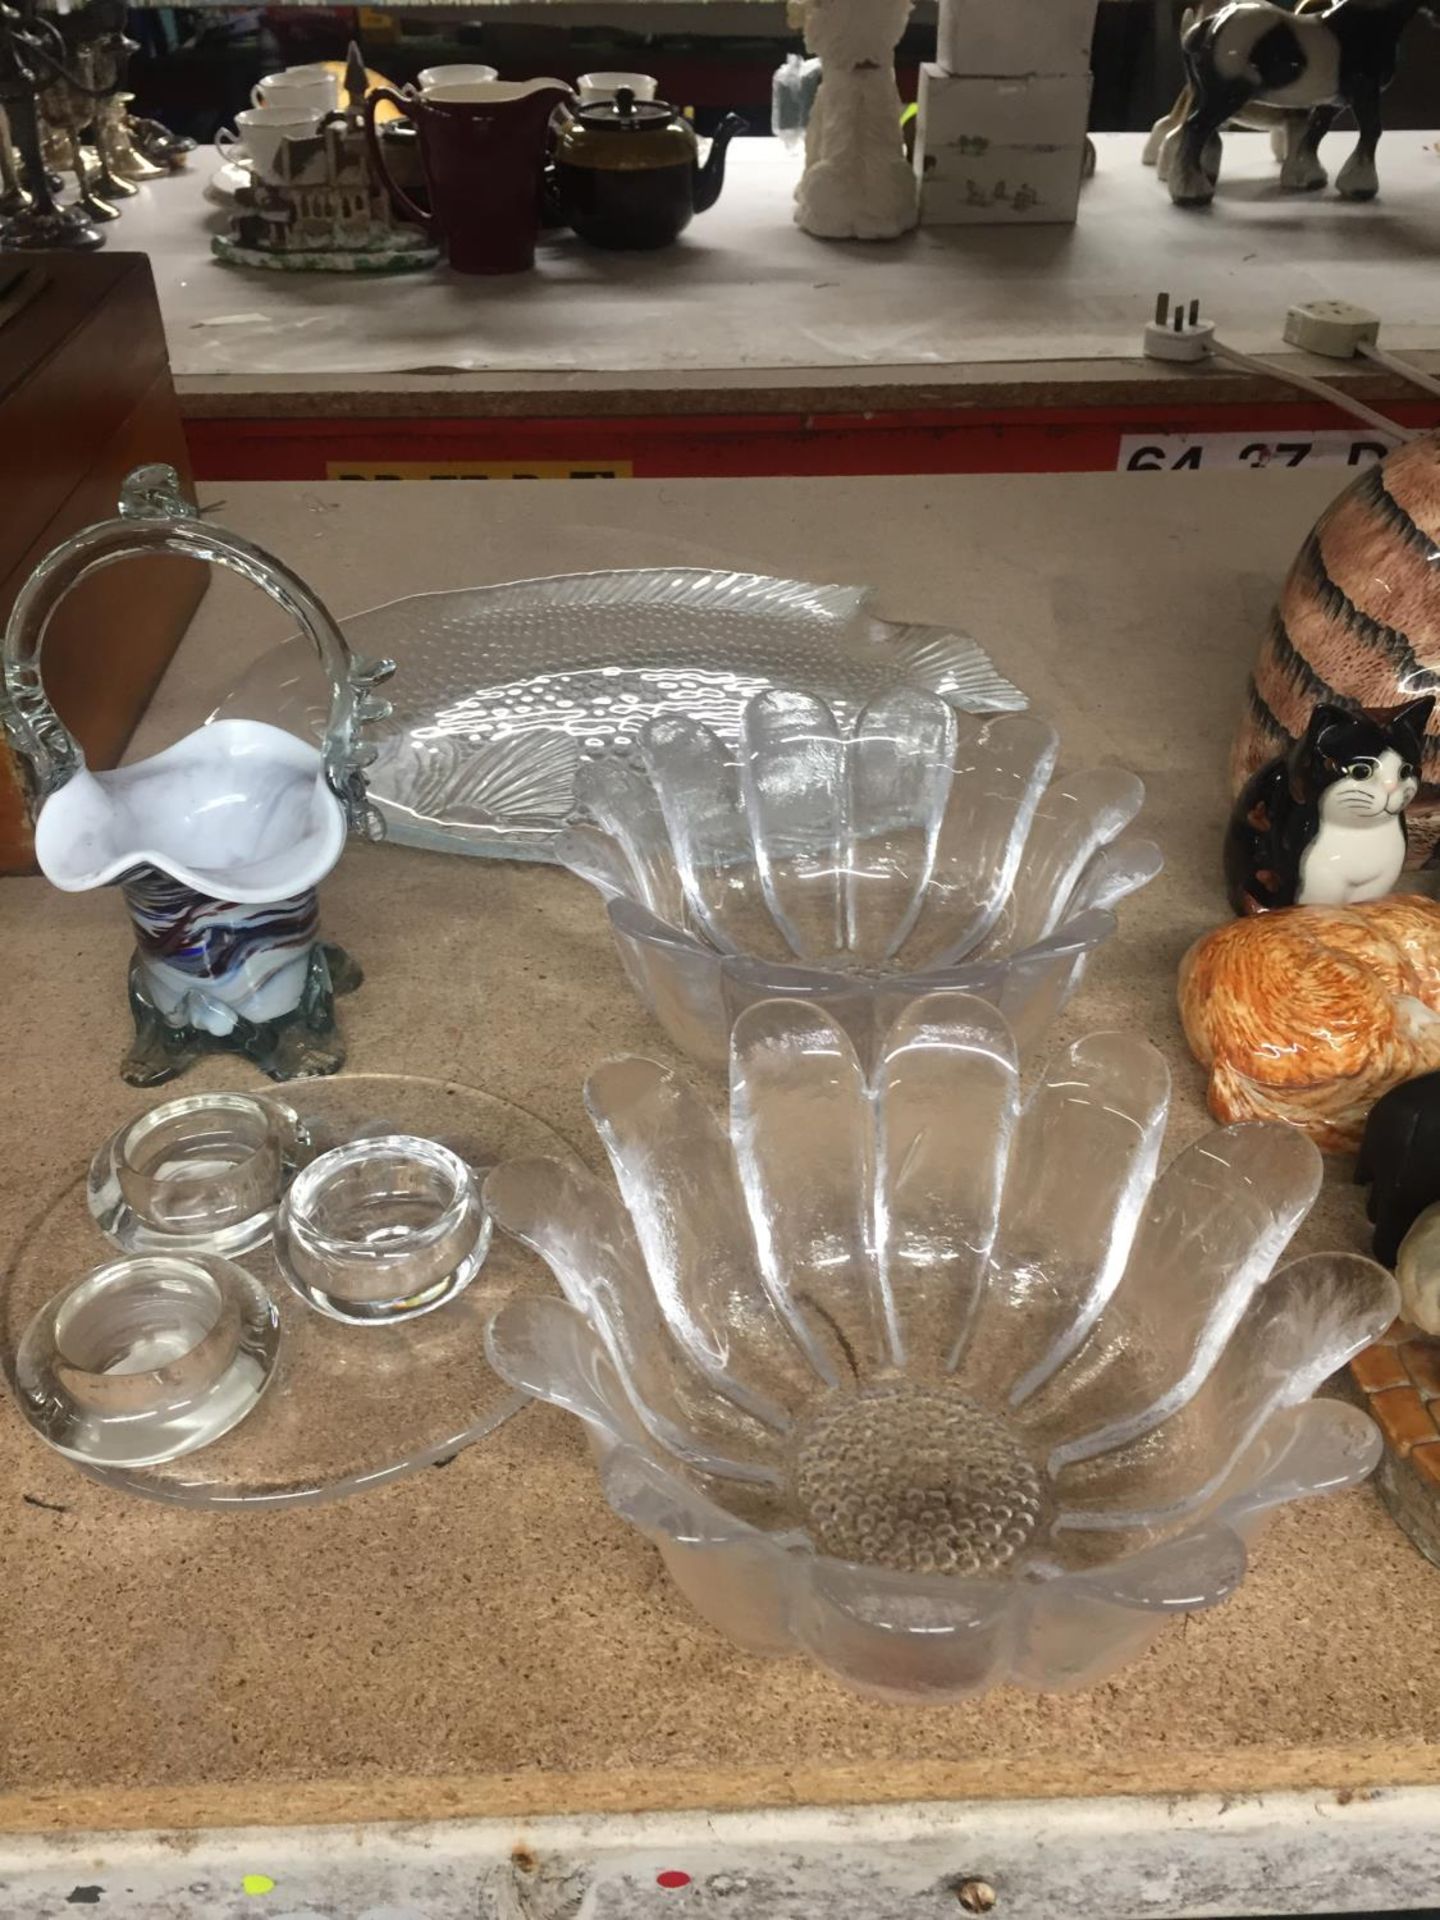 TWO FLOWER SHAPED GLASS BOWLS, A MURANO STYLE BASKET BOWL WITH PONTIL MARK, LARGE FISH PLATE AND